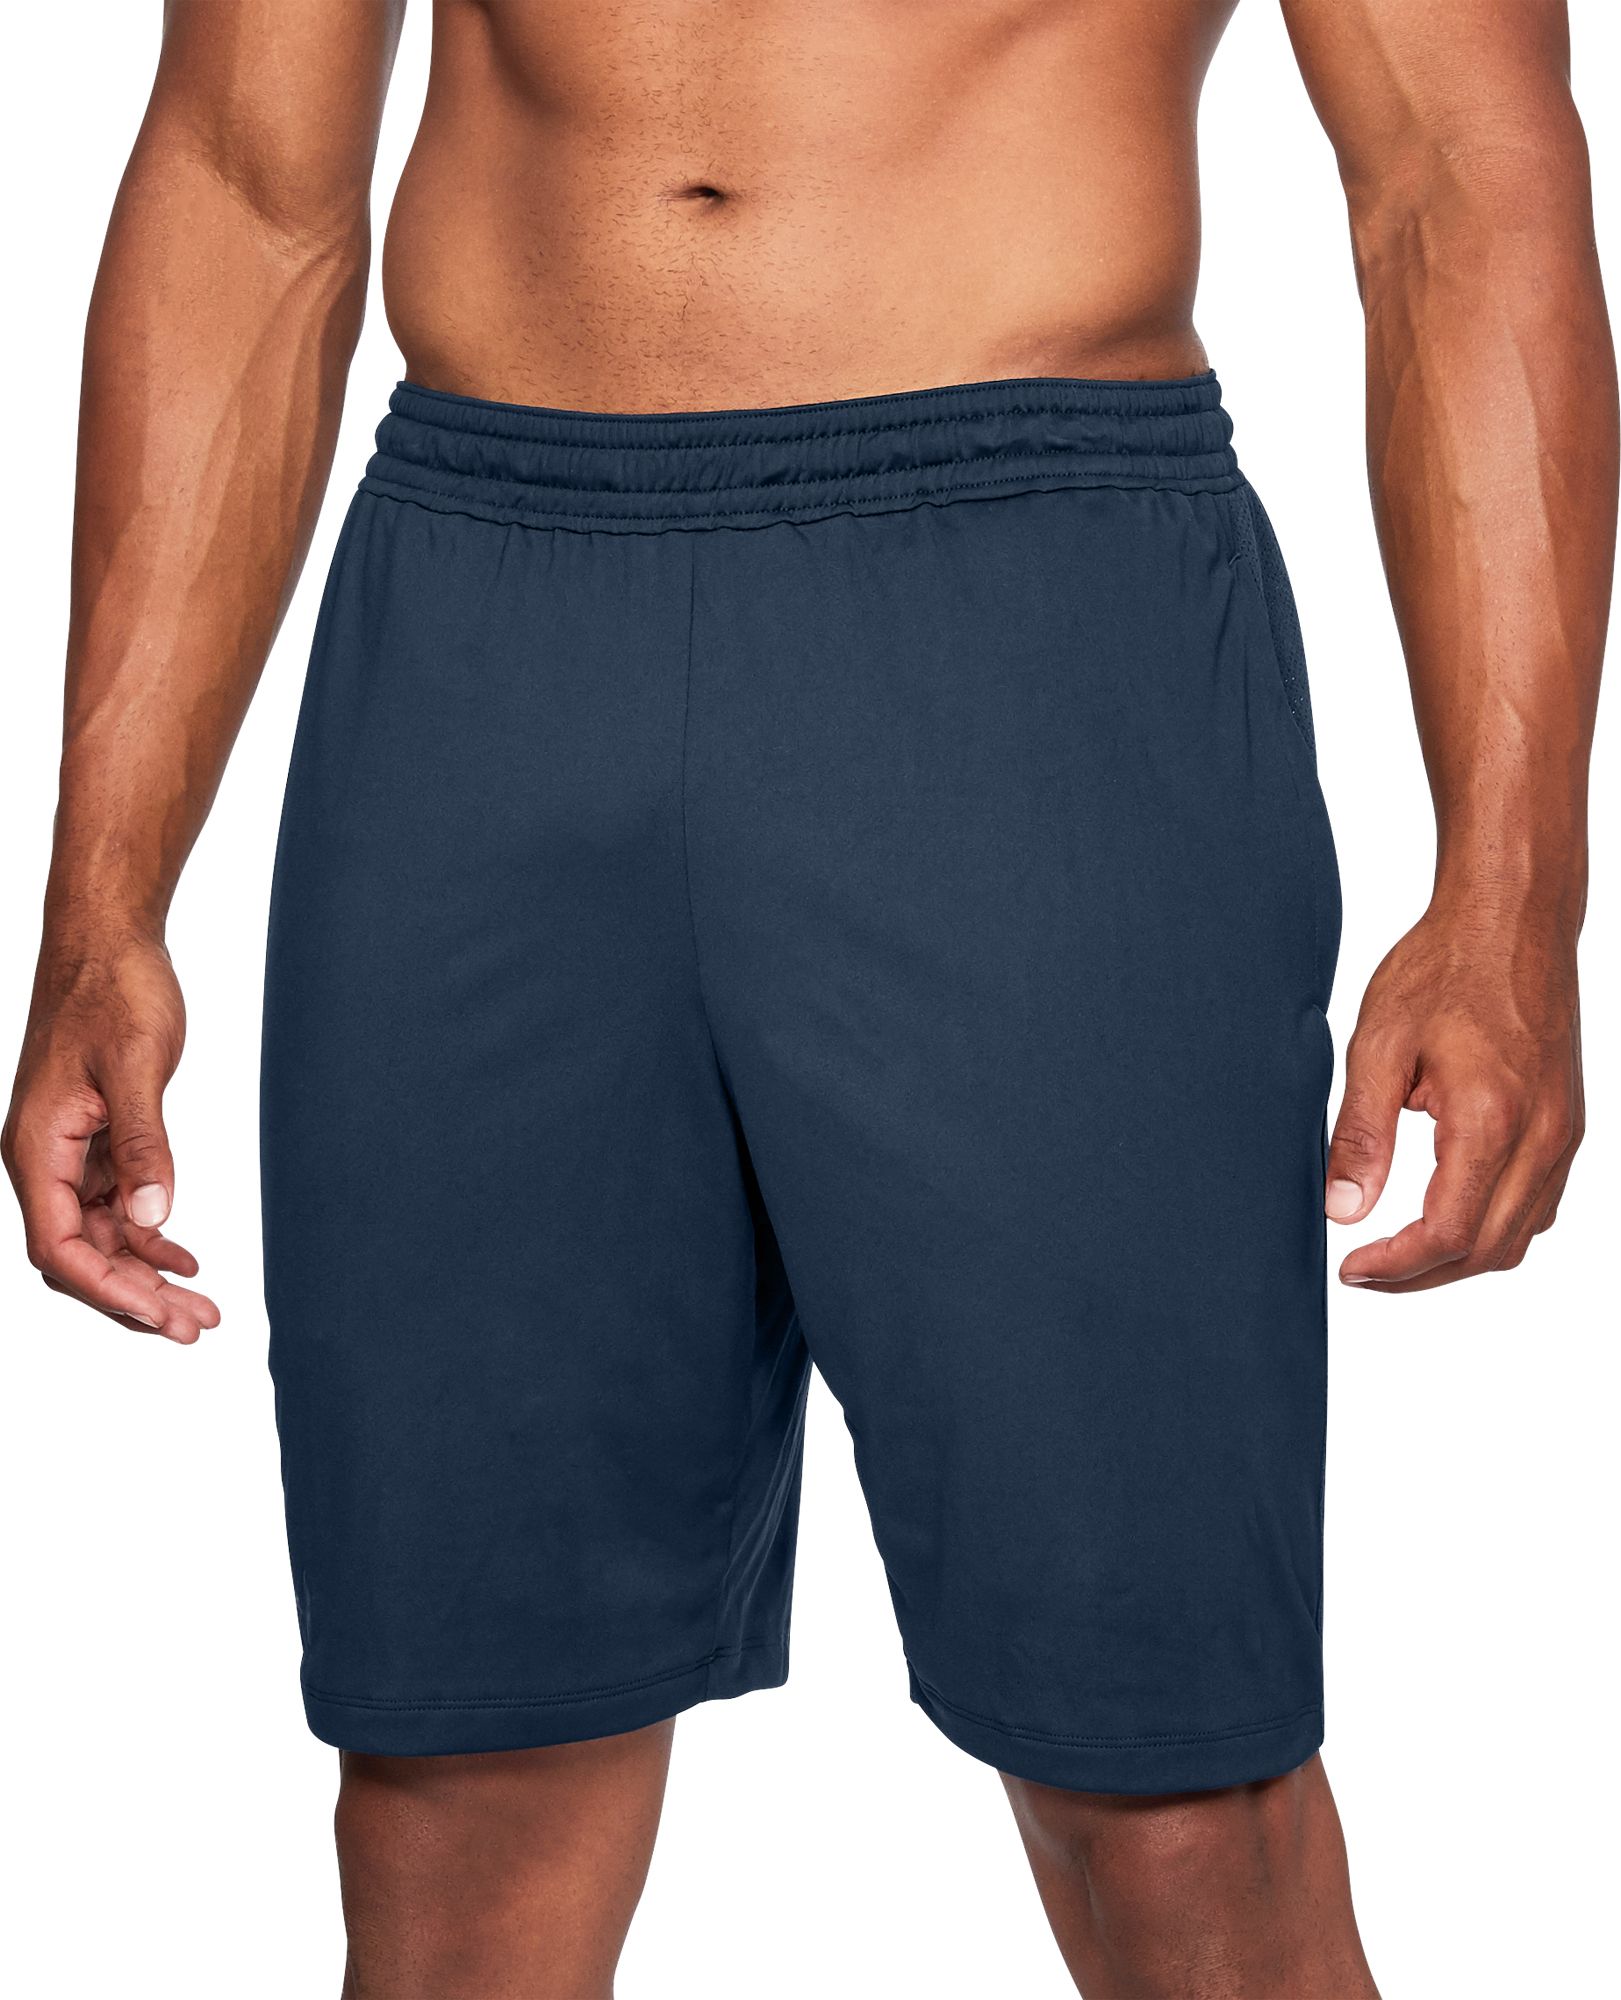 men's under armour shorts with zipper pockets